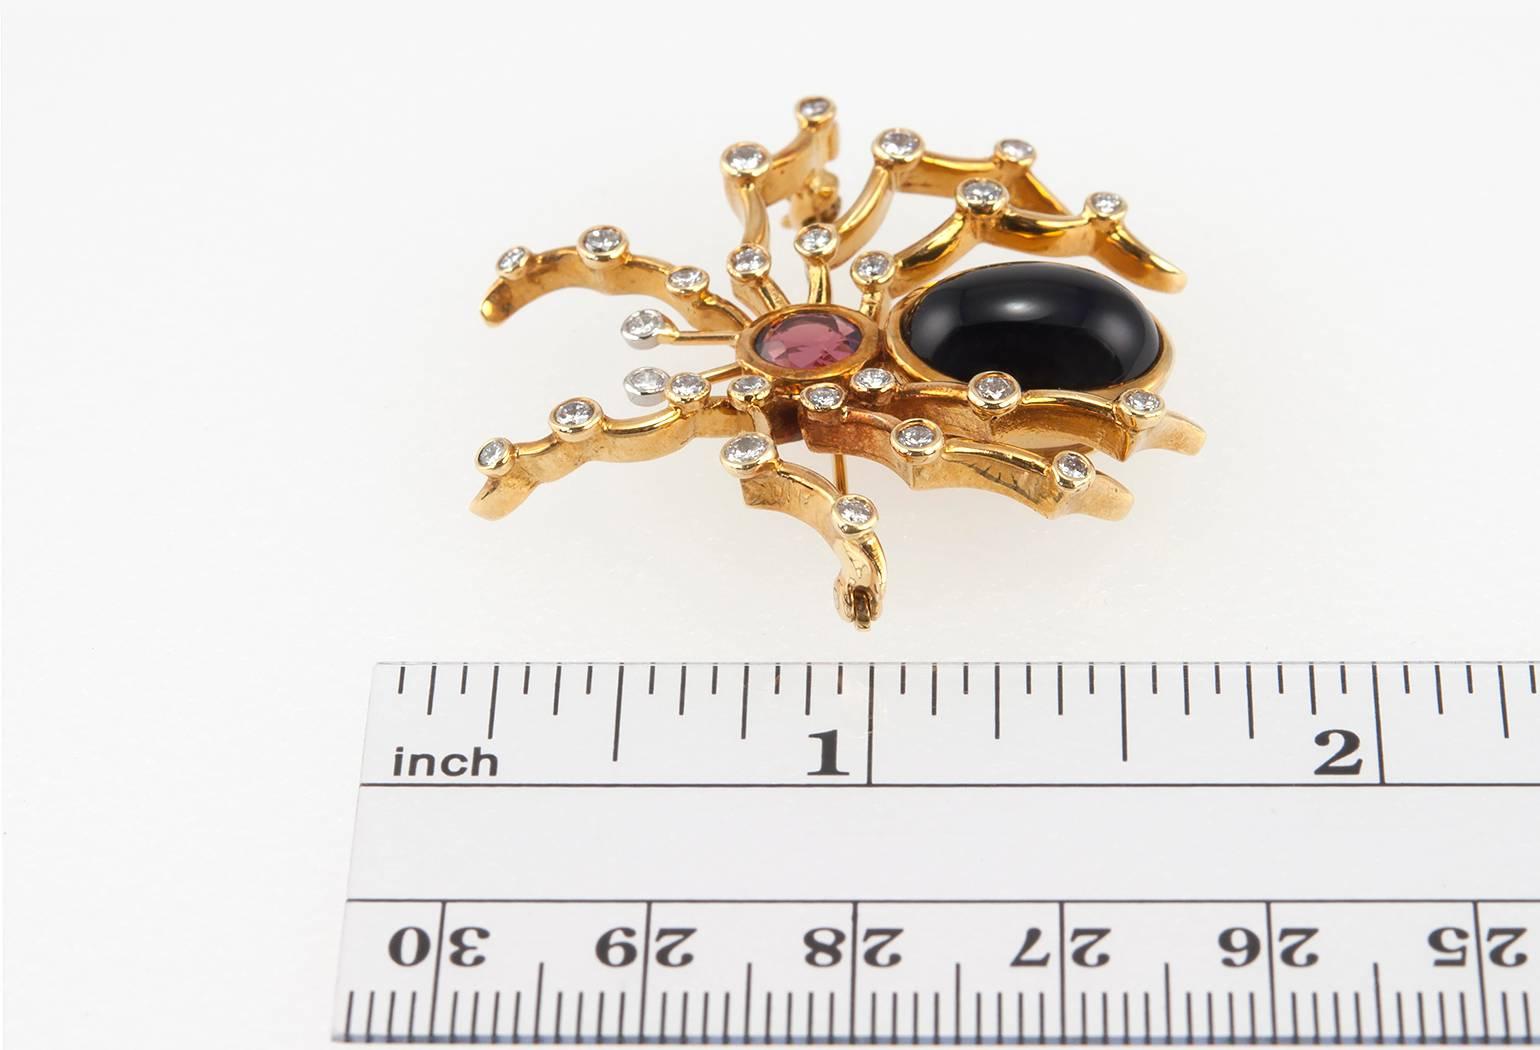 Tiffany & Co. Paloma Picasso spider brooch in 18 karat yellow gold.  This fantastic brooch features onyx and tourmaline for the spiders body with 26 round bezel set diamonds on the spider's legs. Circa 2000s.